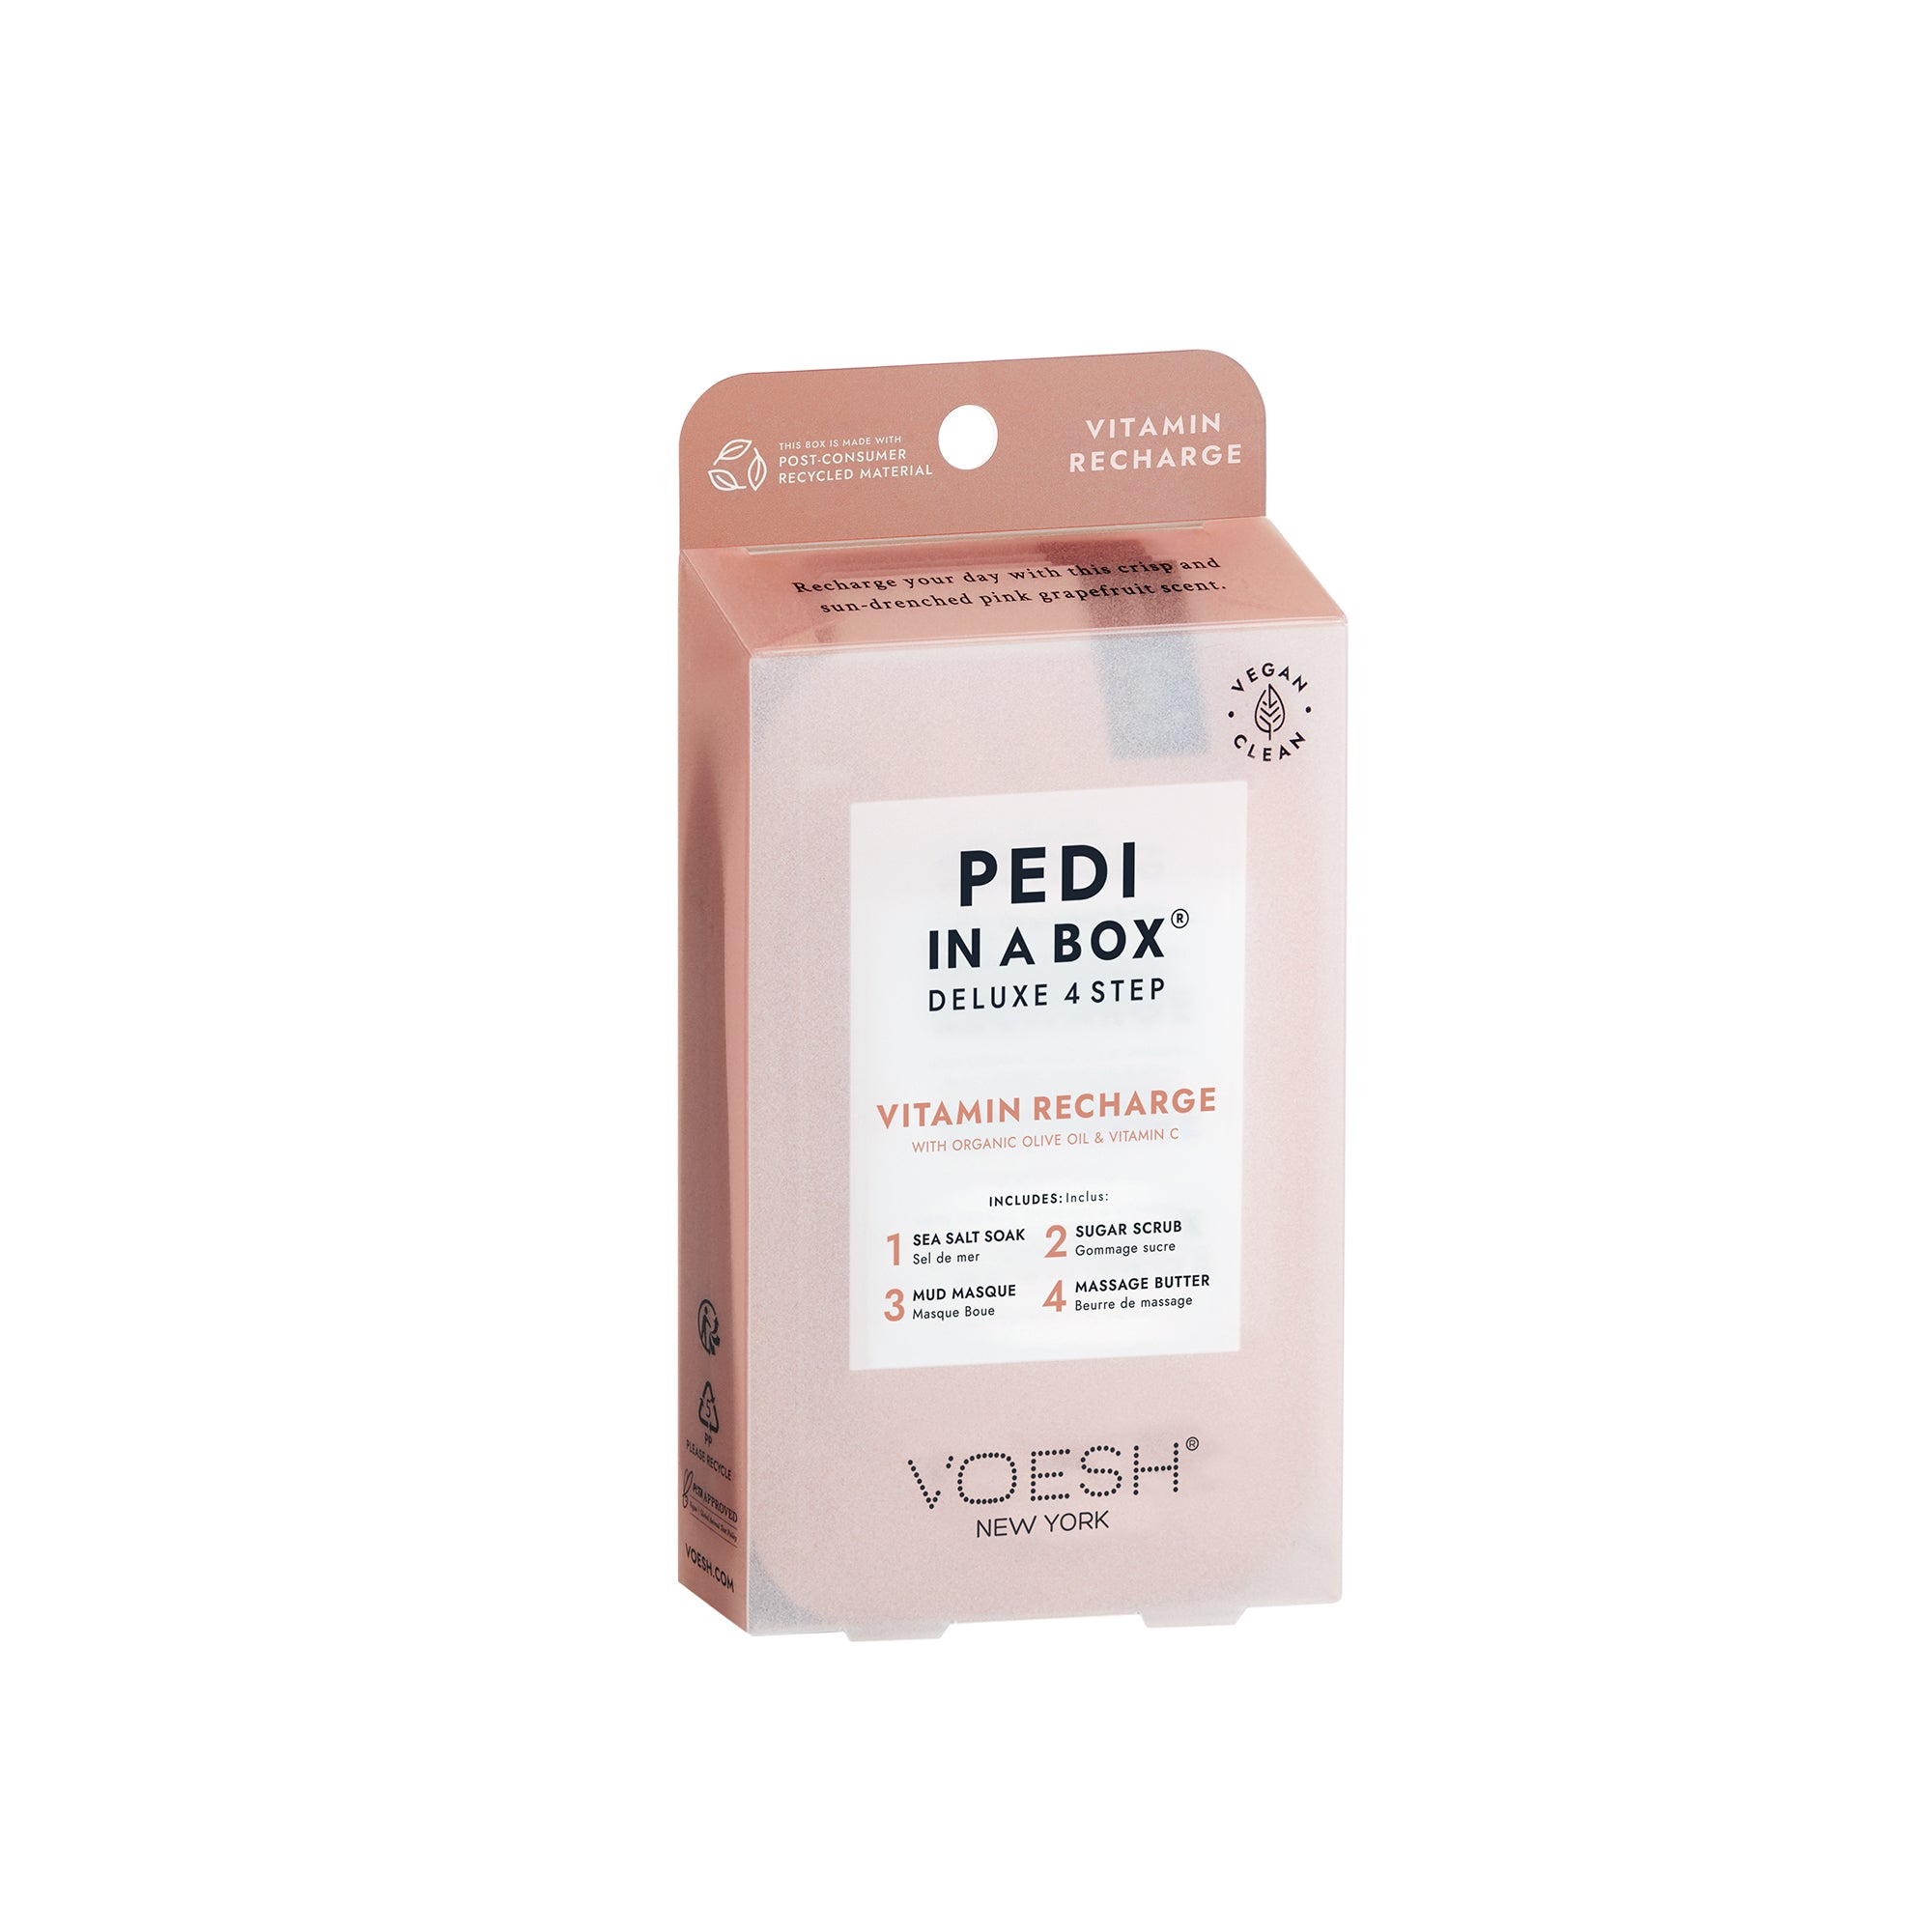 Voesh Deluxe 4 Step Pedi-in-a-Box Vitamin Recharge